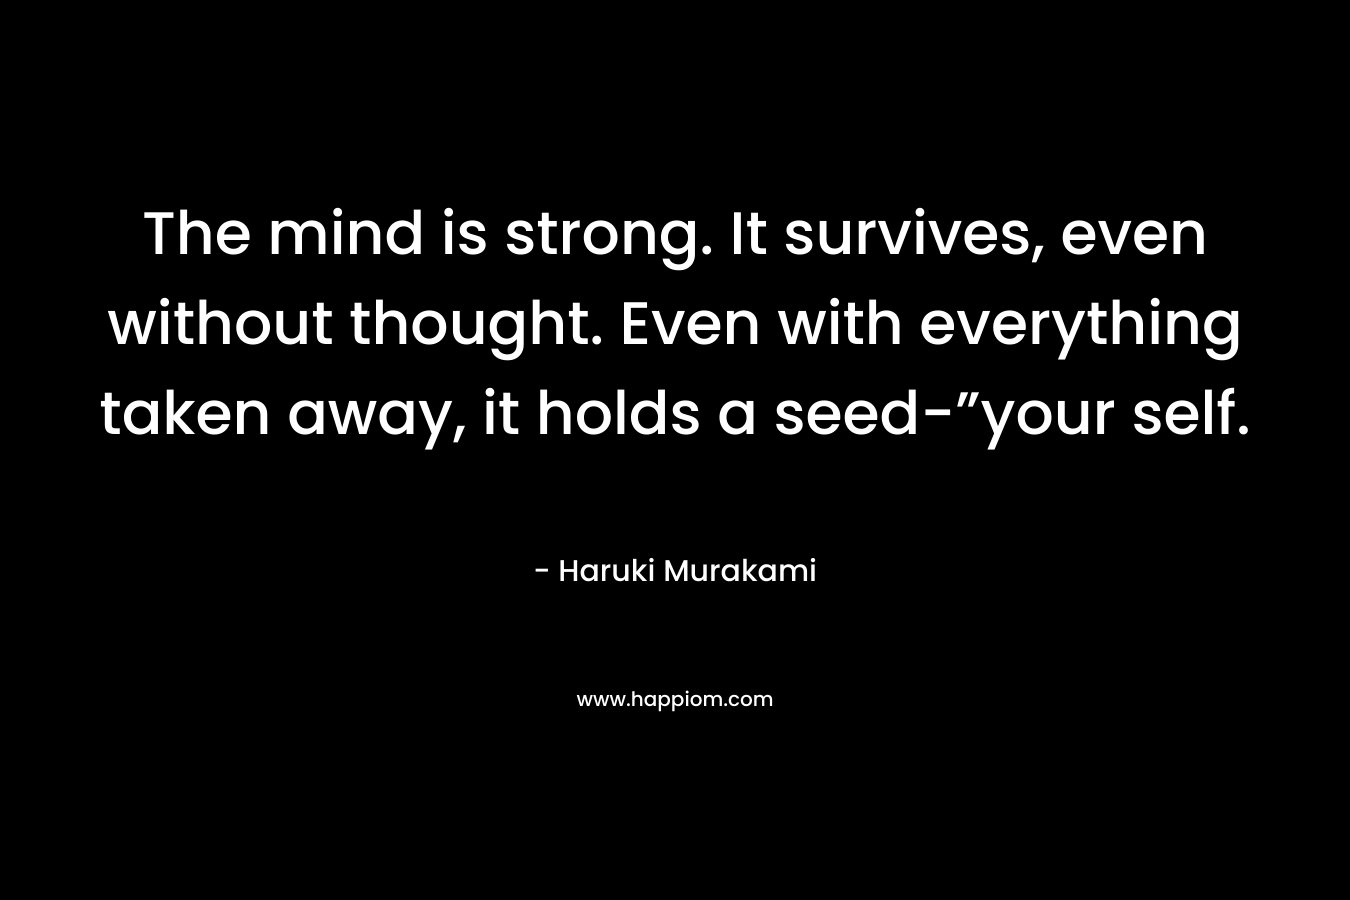 The mind is strong. It survives, even without thought. Even with everything taken away, it holds a seed-”your self.